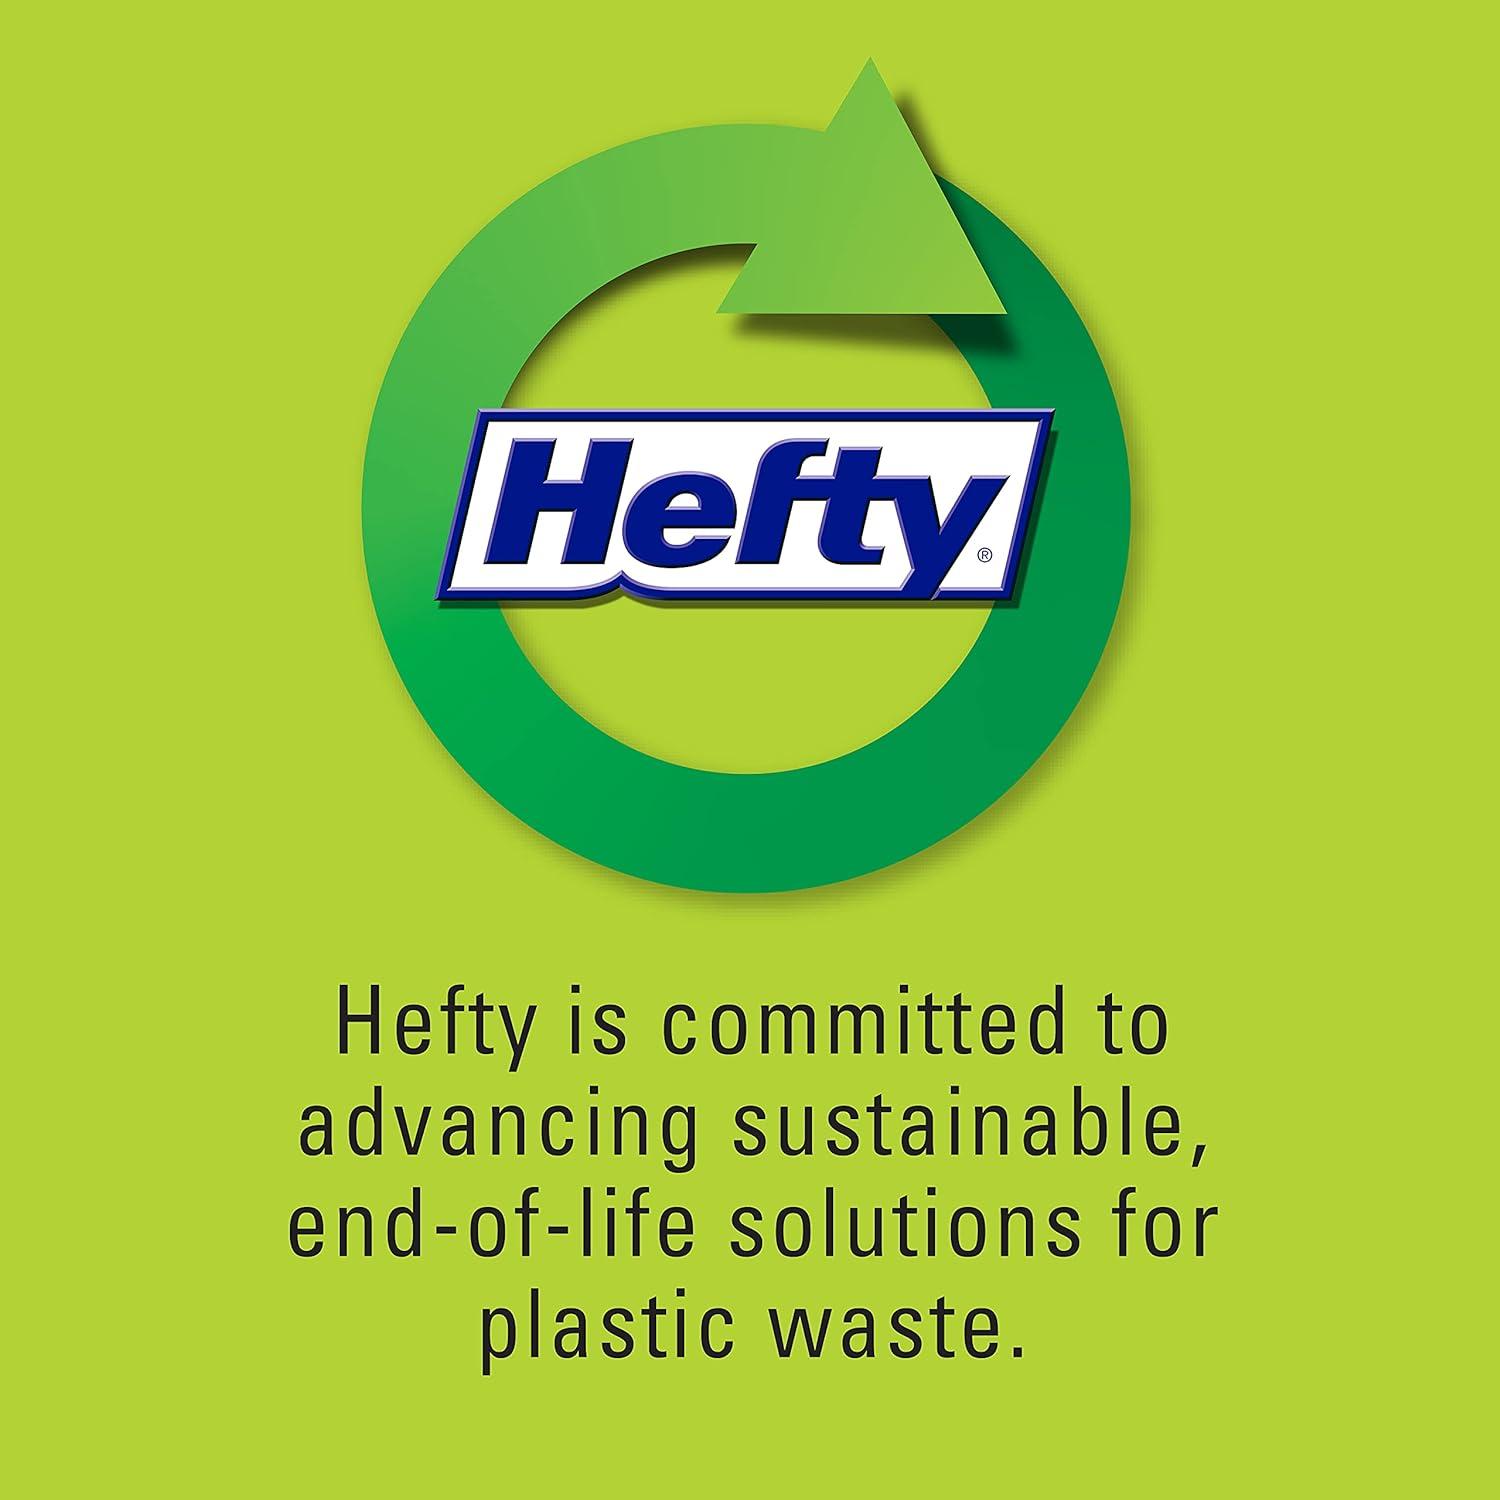 Hefty Ultra Strong Trash Bags, Drawstring, Fabuloso Scent, Large - 25 bags